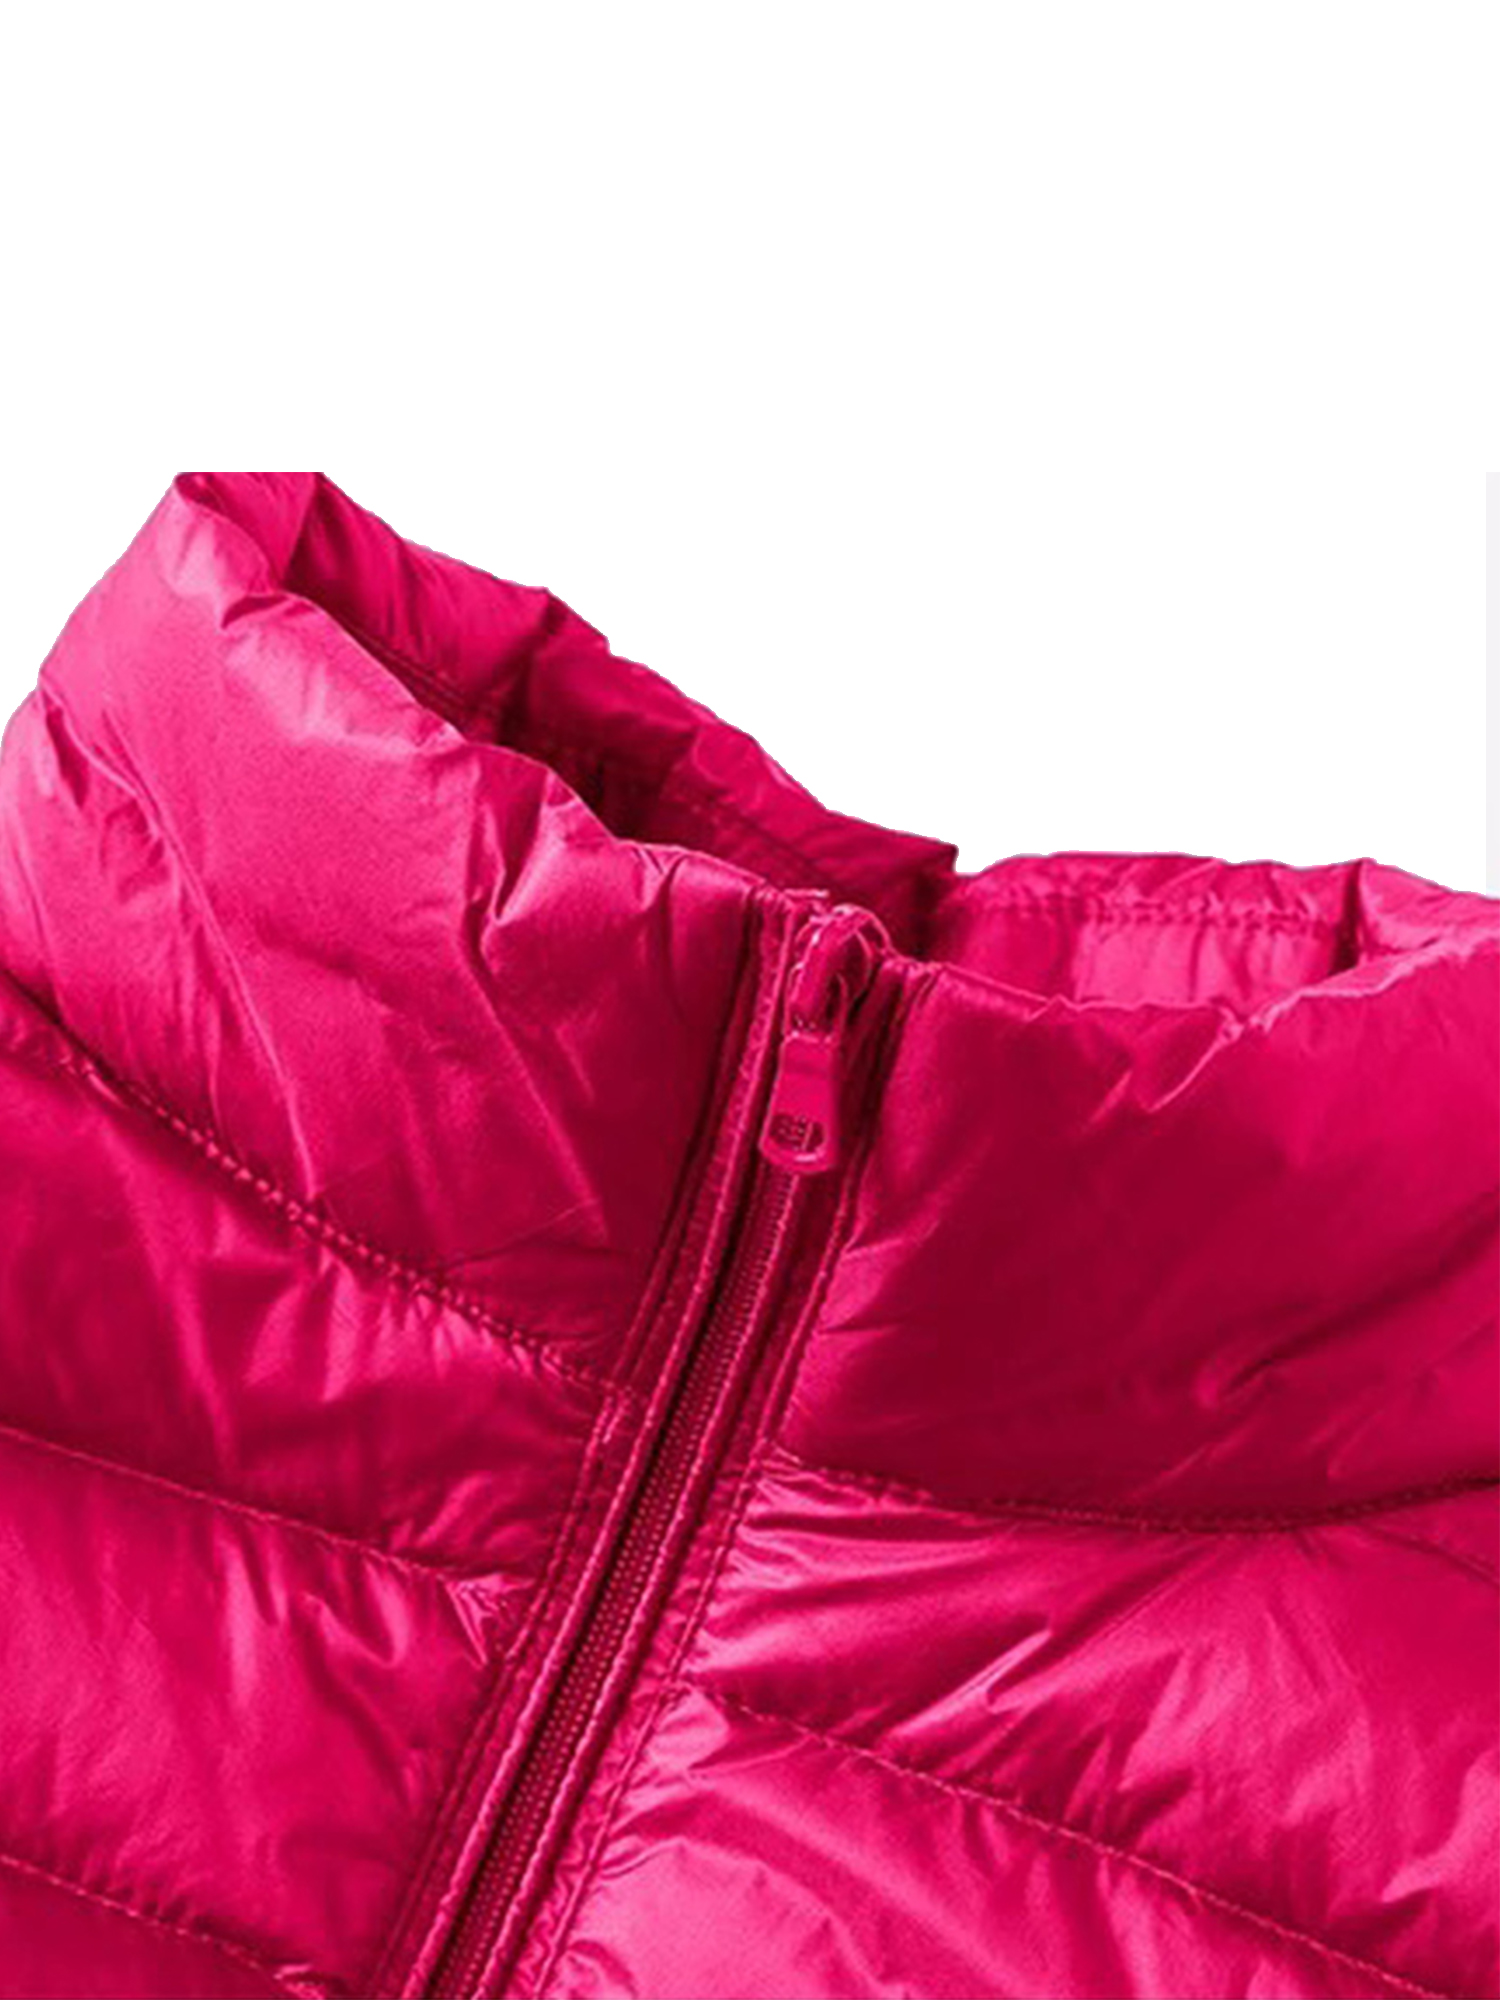 Plus Size Women Casual Stand-up Collar Zip Up Gilet Quilted Padded Vest Sleeveless Lightweight Packable Down Vest Jacket Ladies Fashion Winter Warm Puffer Outwear Vest - image 3 of 5